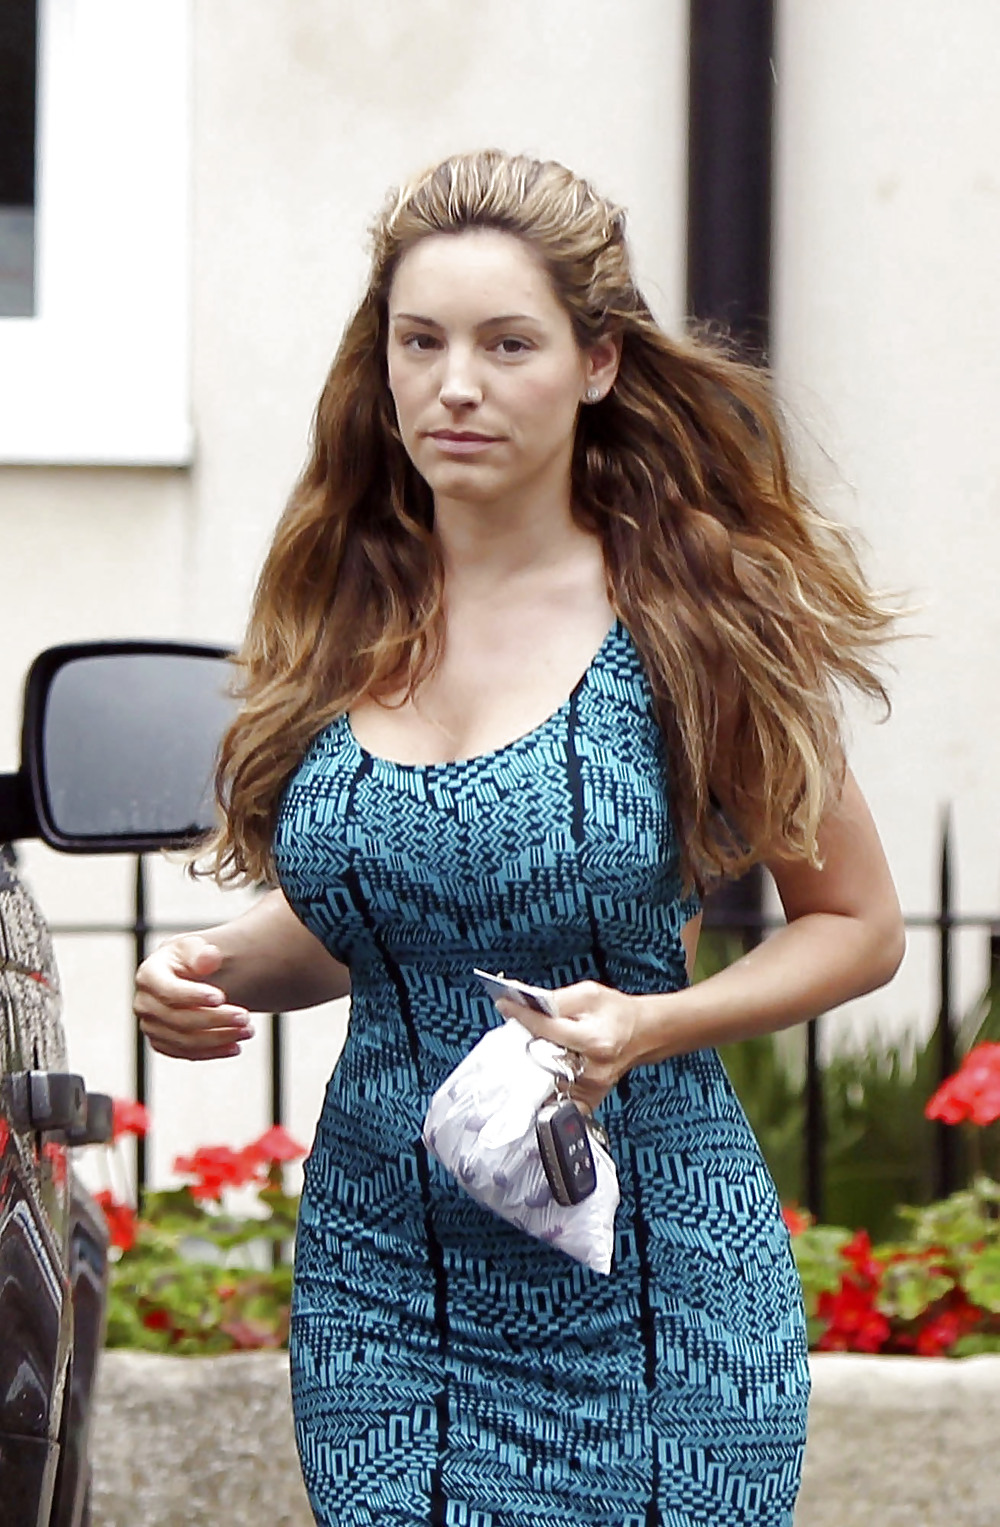 Kelly Brook shopping at a store in England #4370060